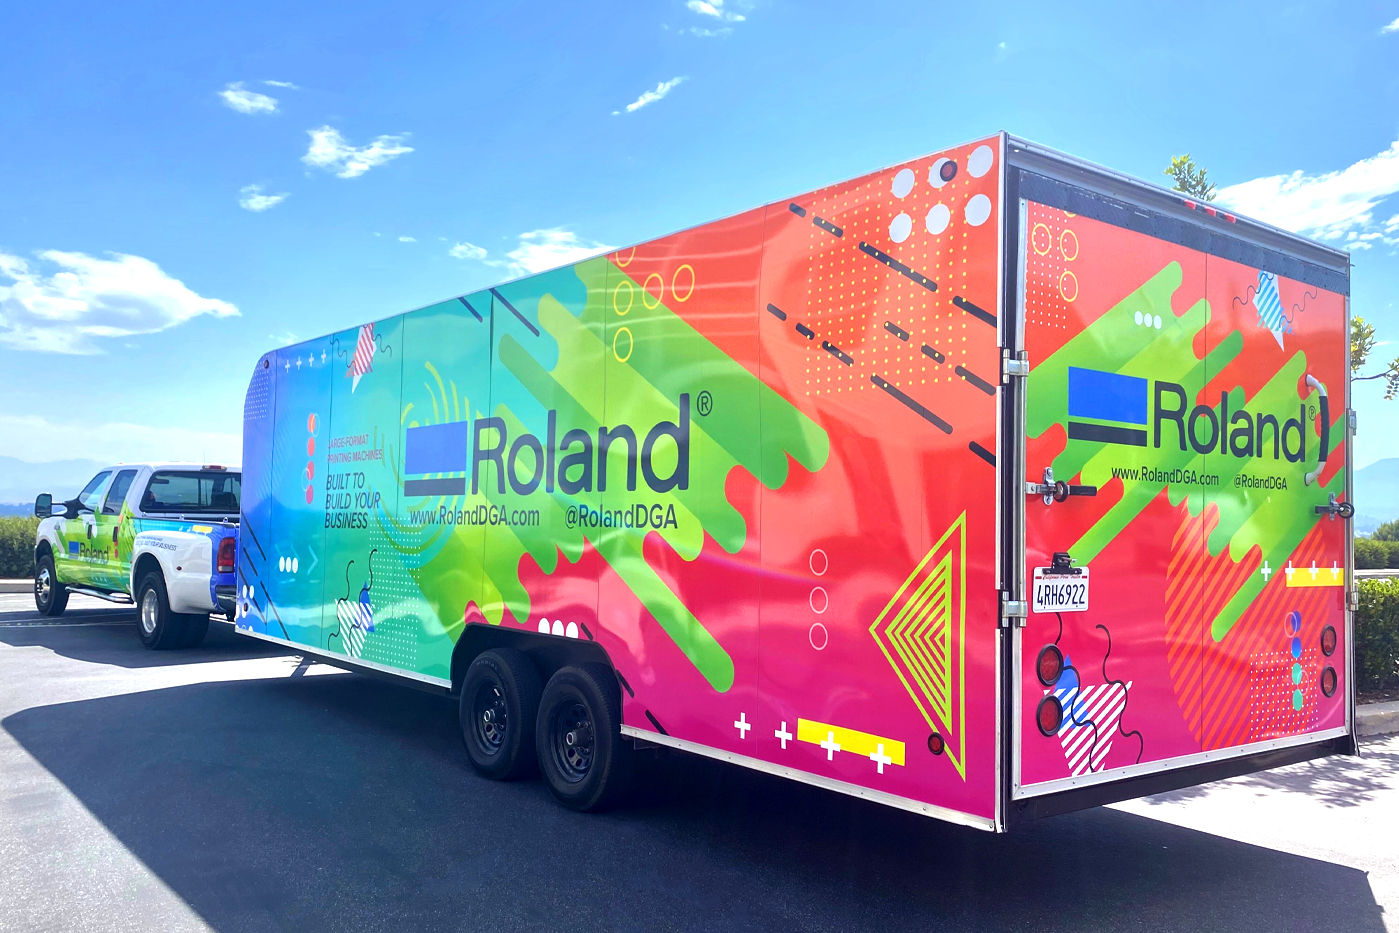 The Roland DGA Demo Days Roadshow truck made its first stop recently in Damascus, Oregon.